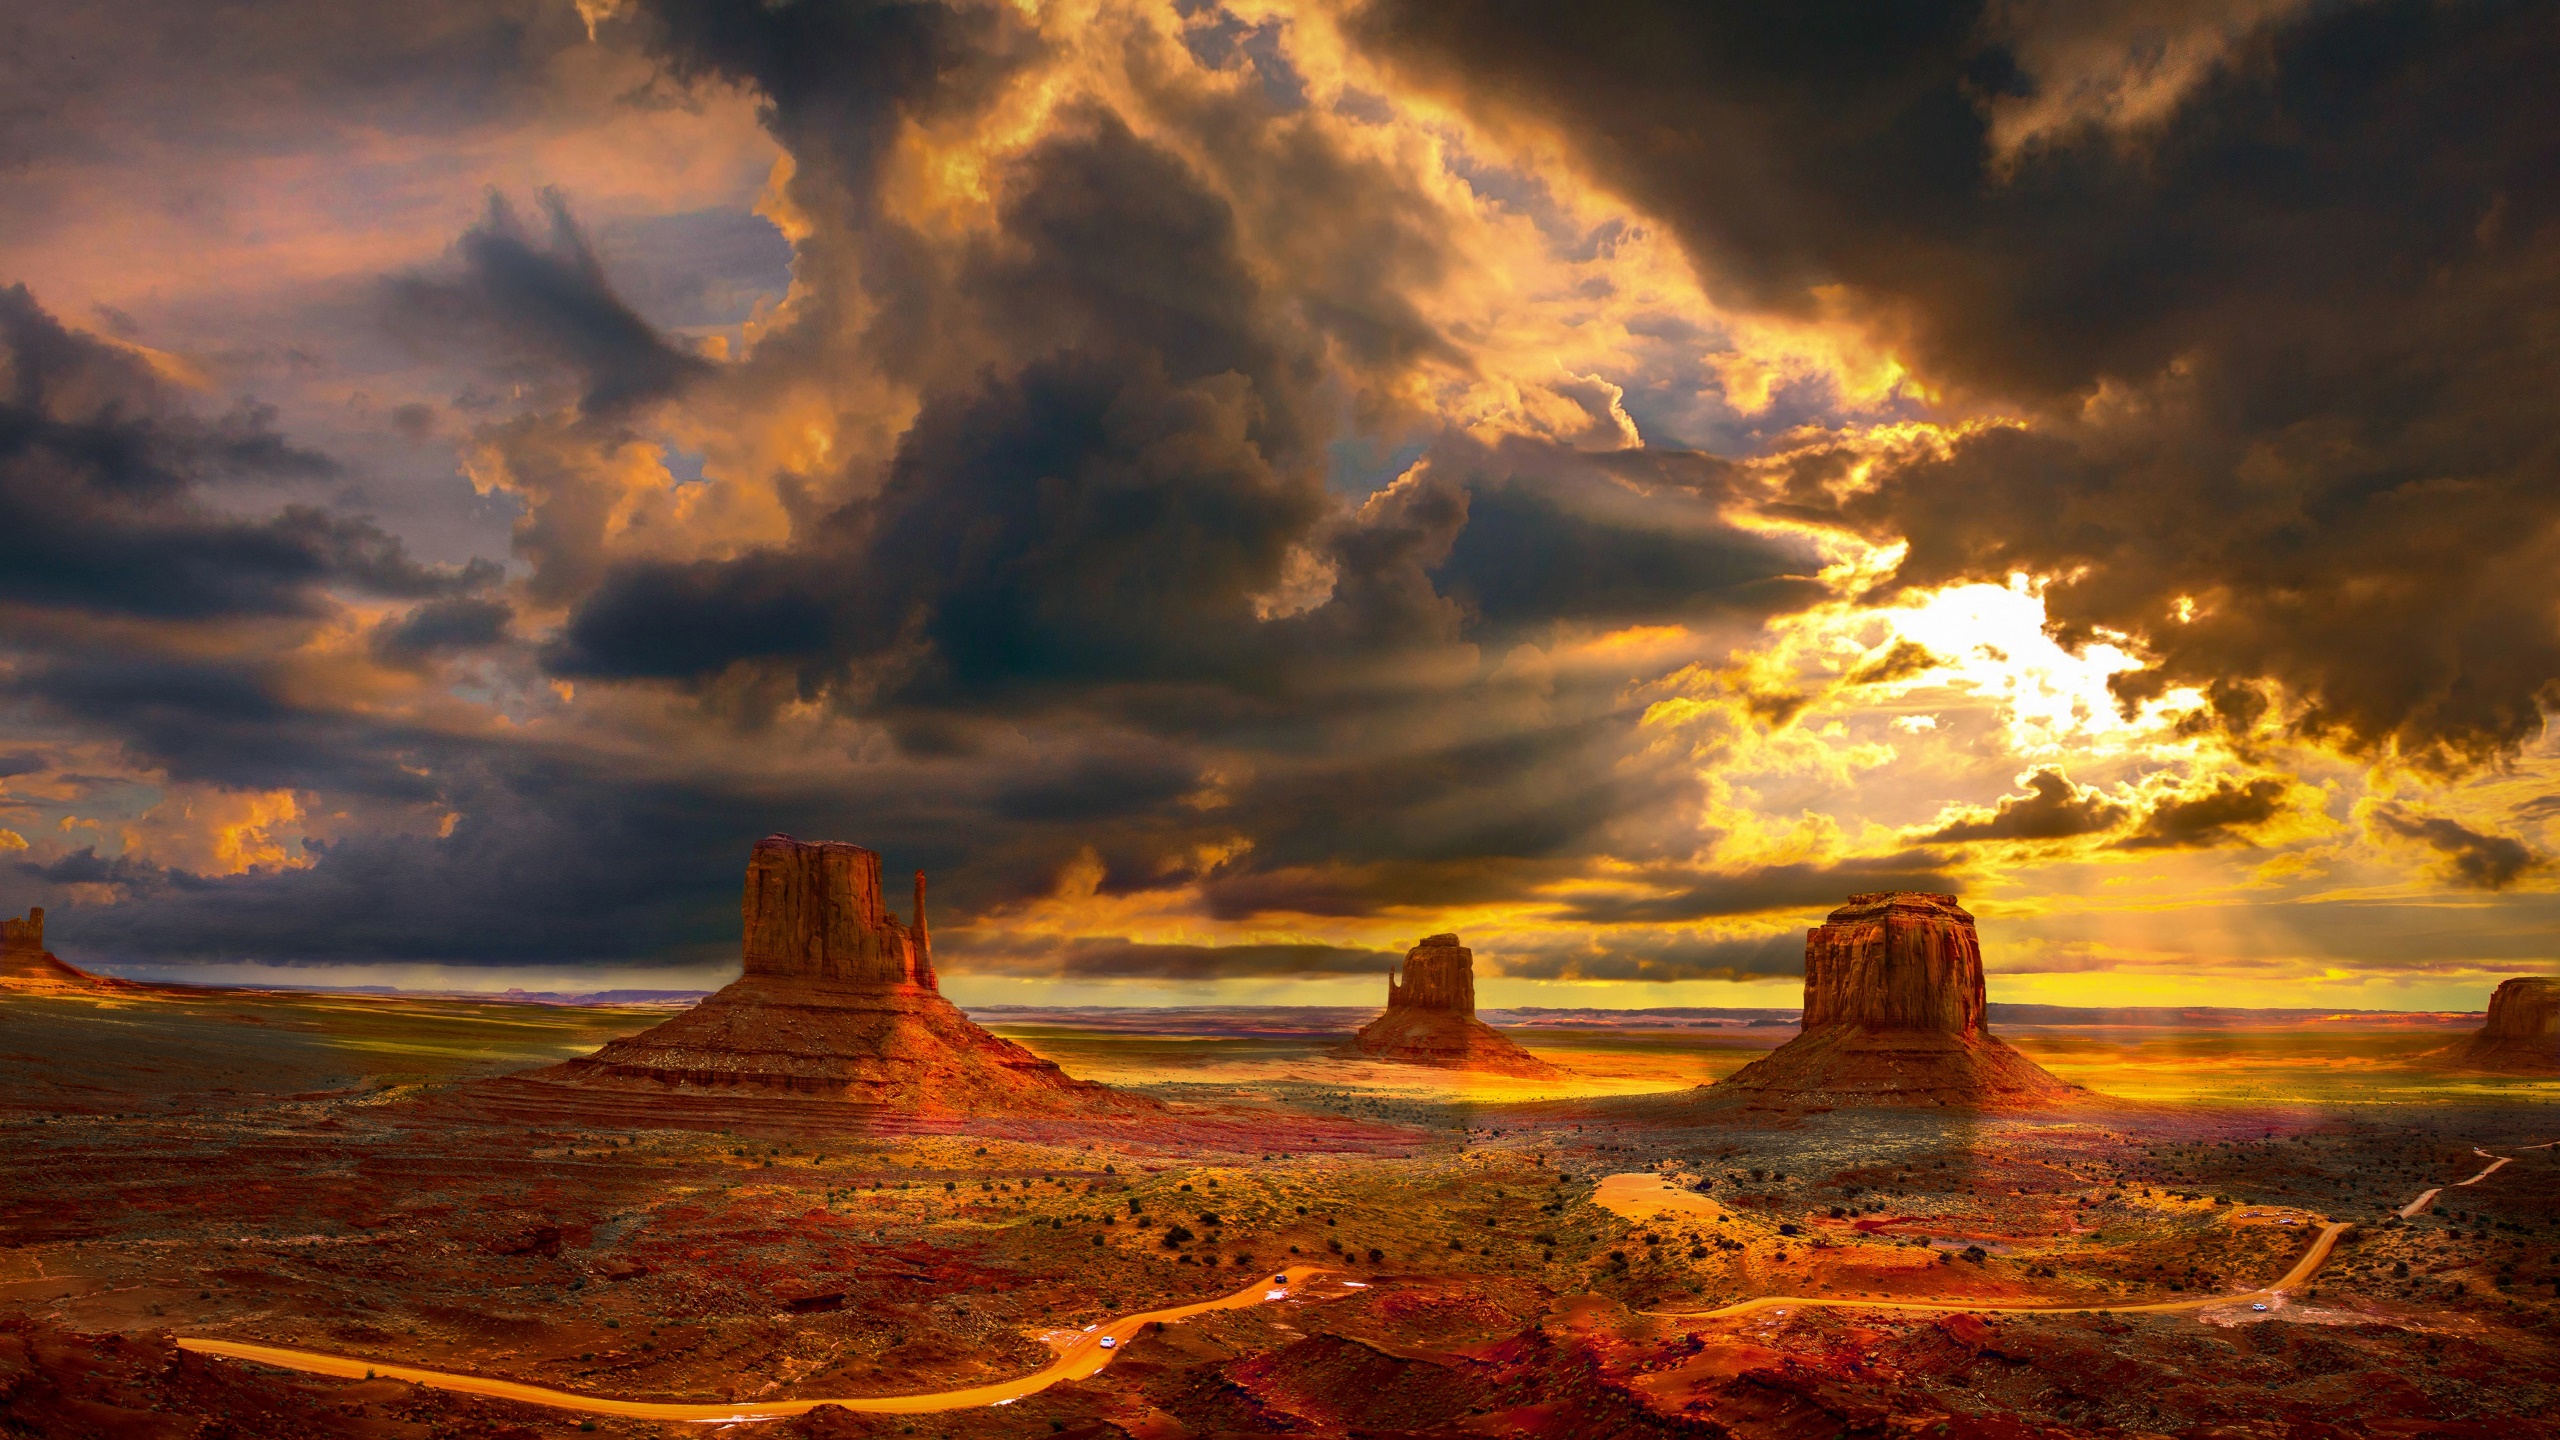 General 2560x1440 landscape nature sky clouds Arizona Monument Valley